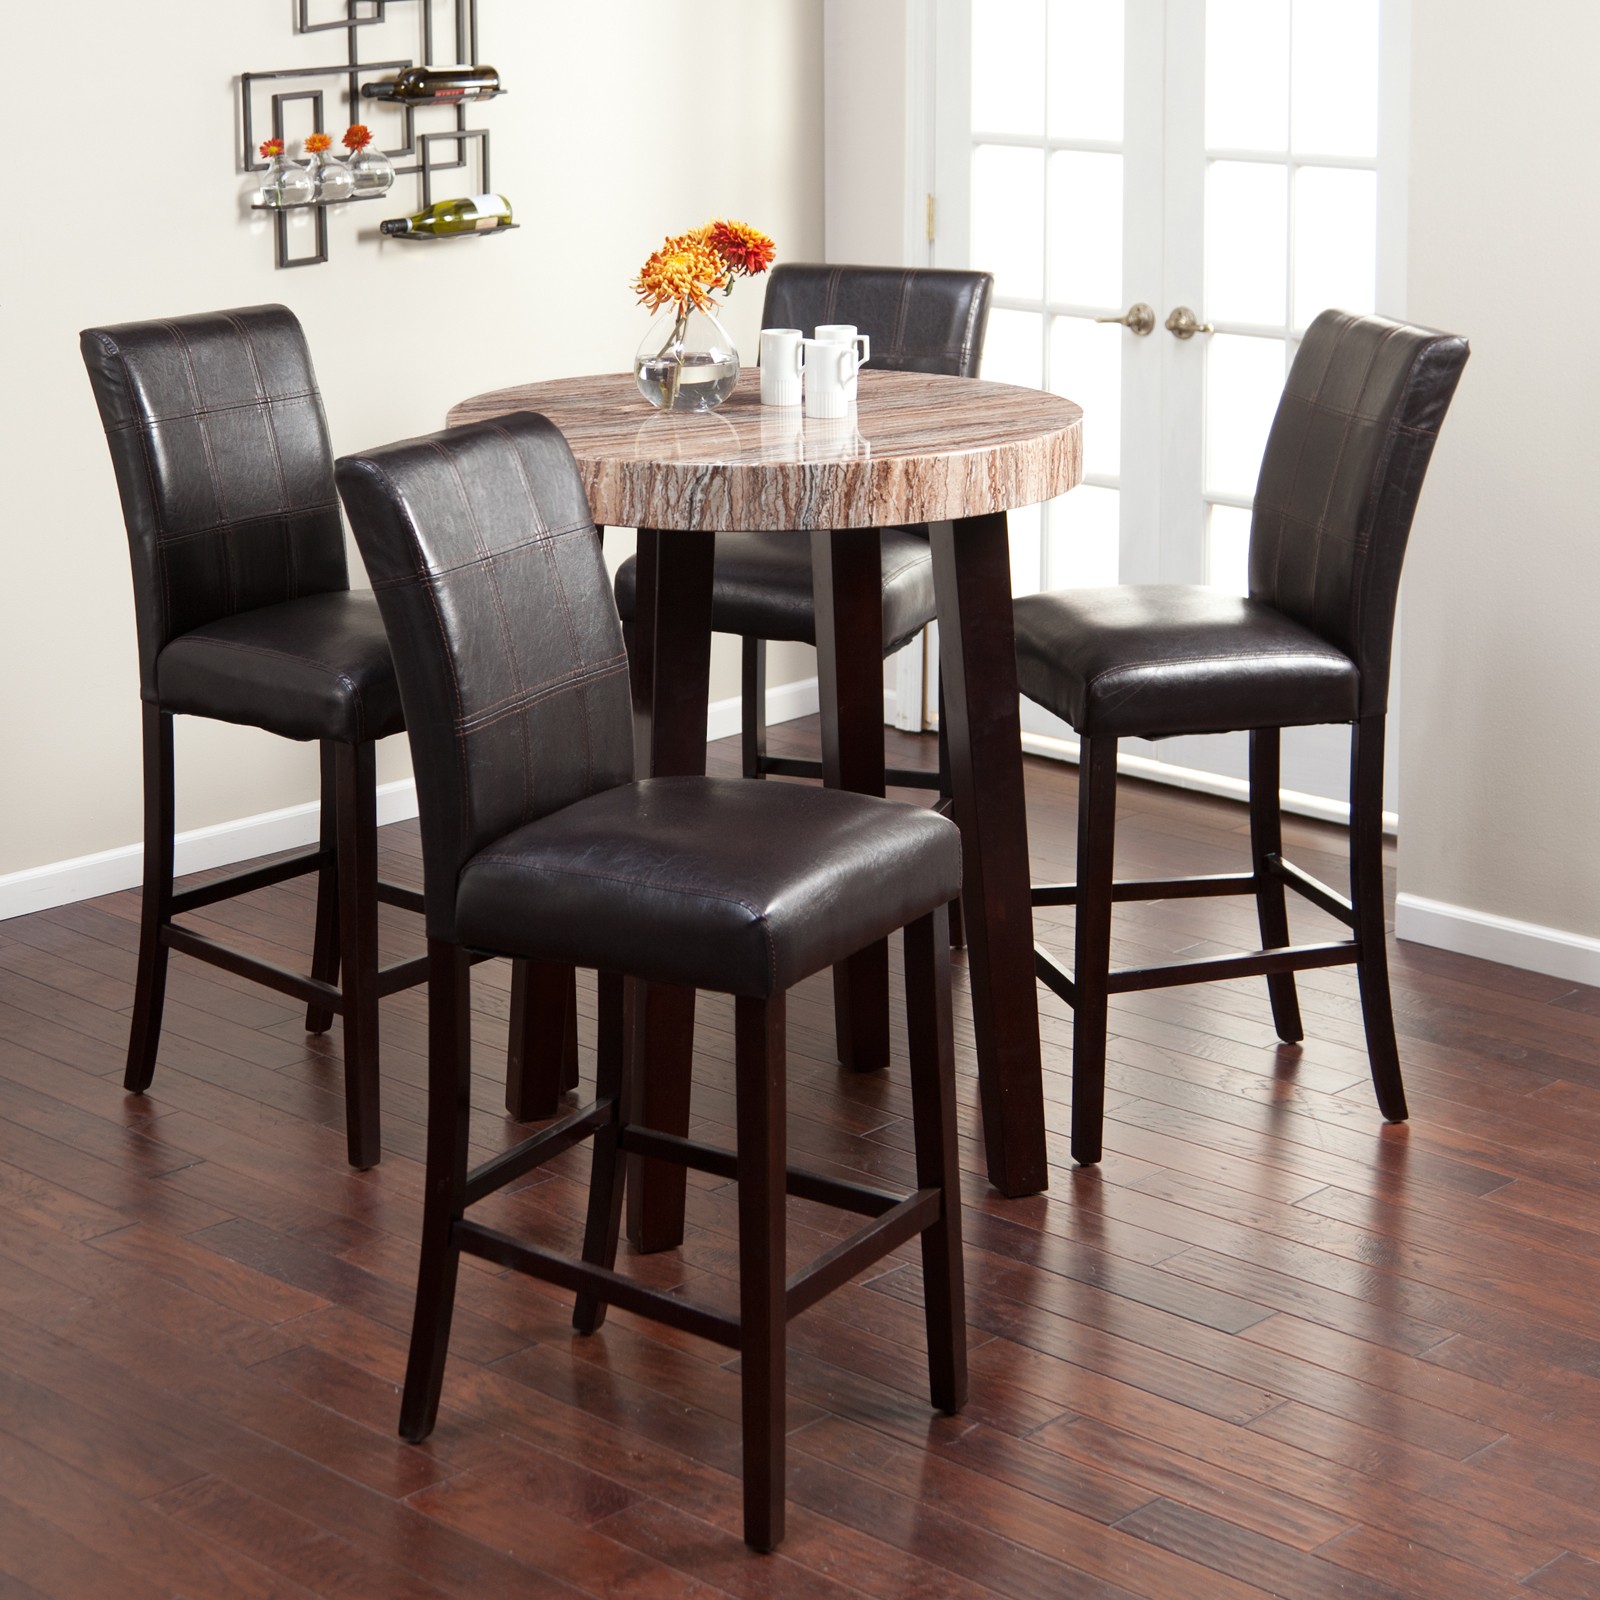 Black high top kitchen table